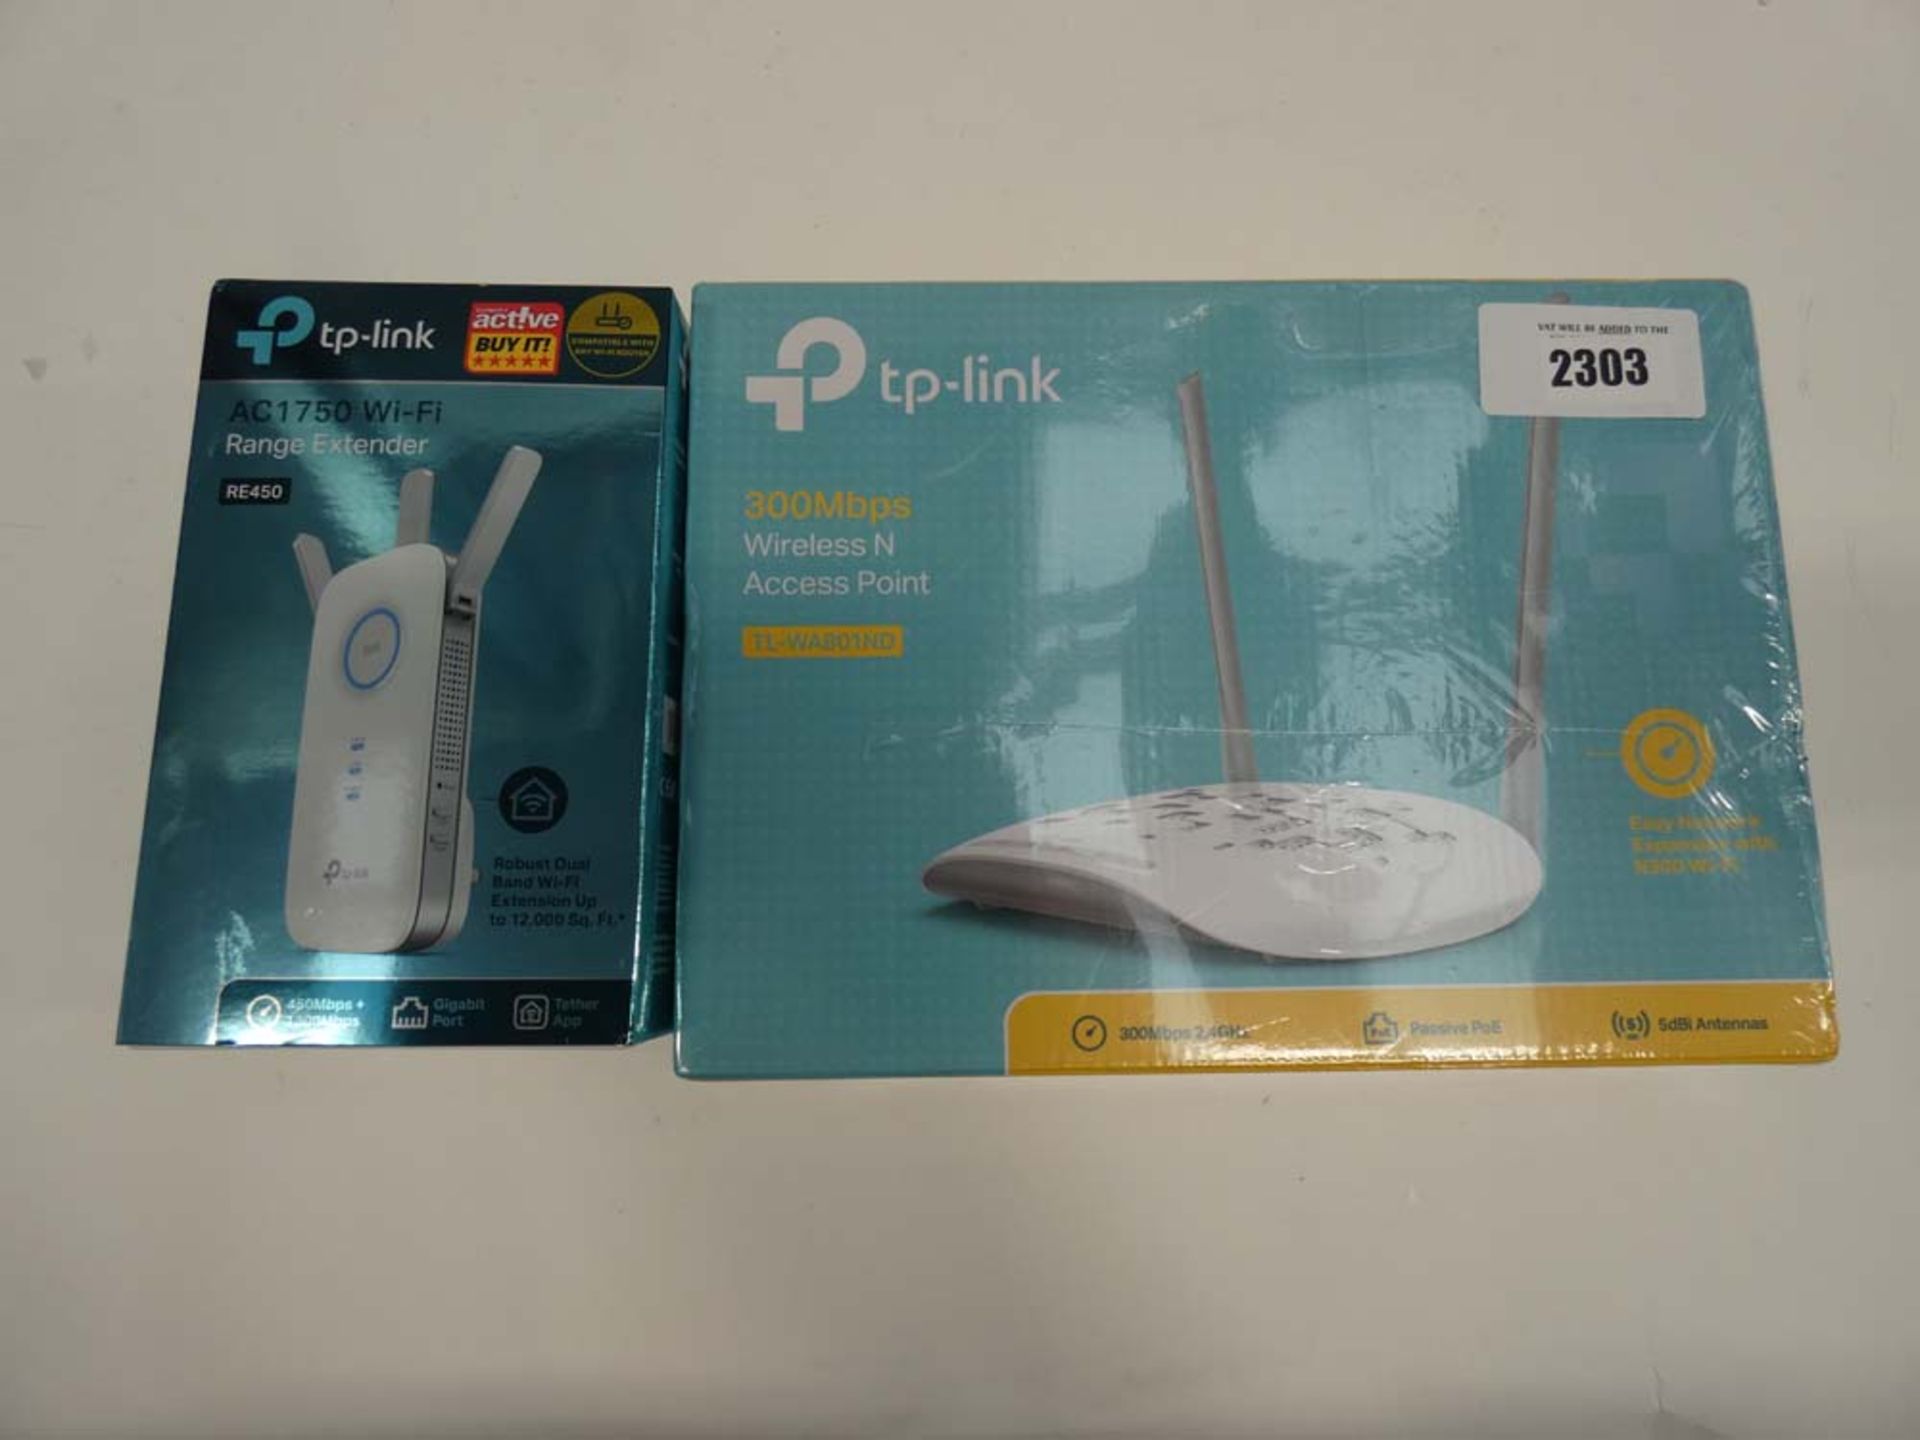 TP-Link TL-WA801ND WiFi router and TP-Link AC1750 WiFi range extender